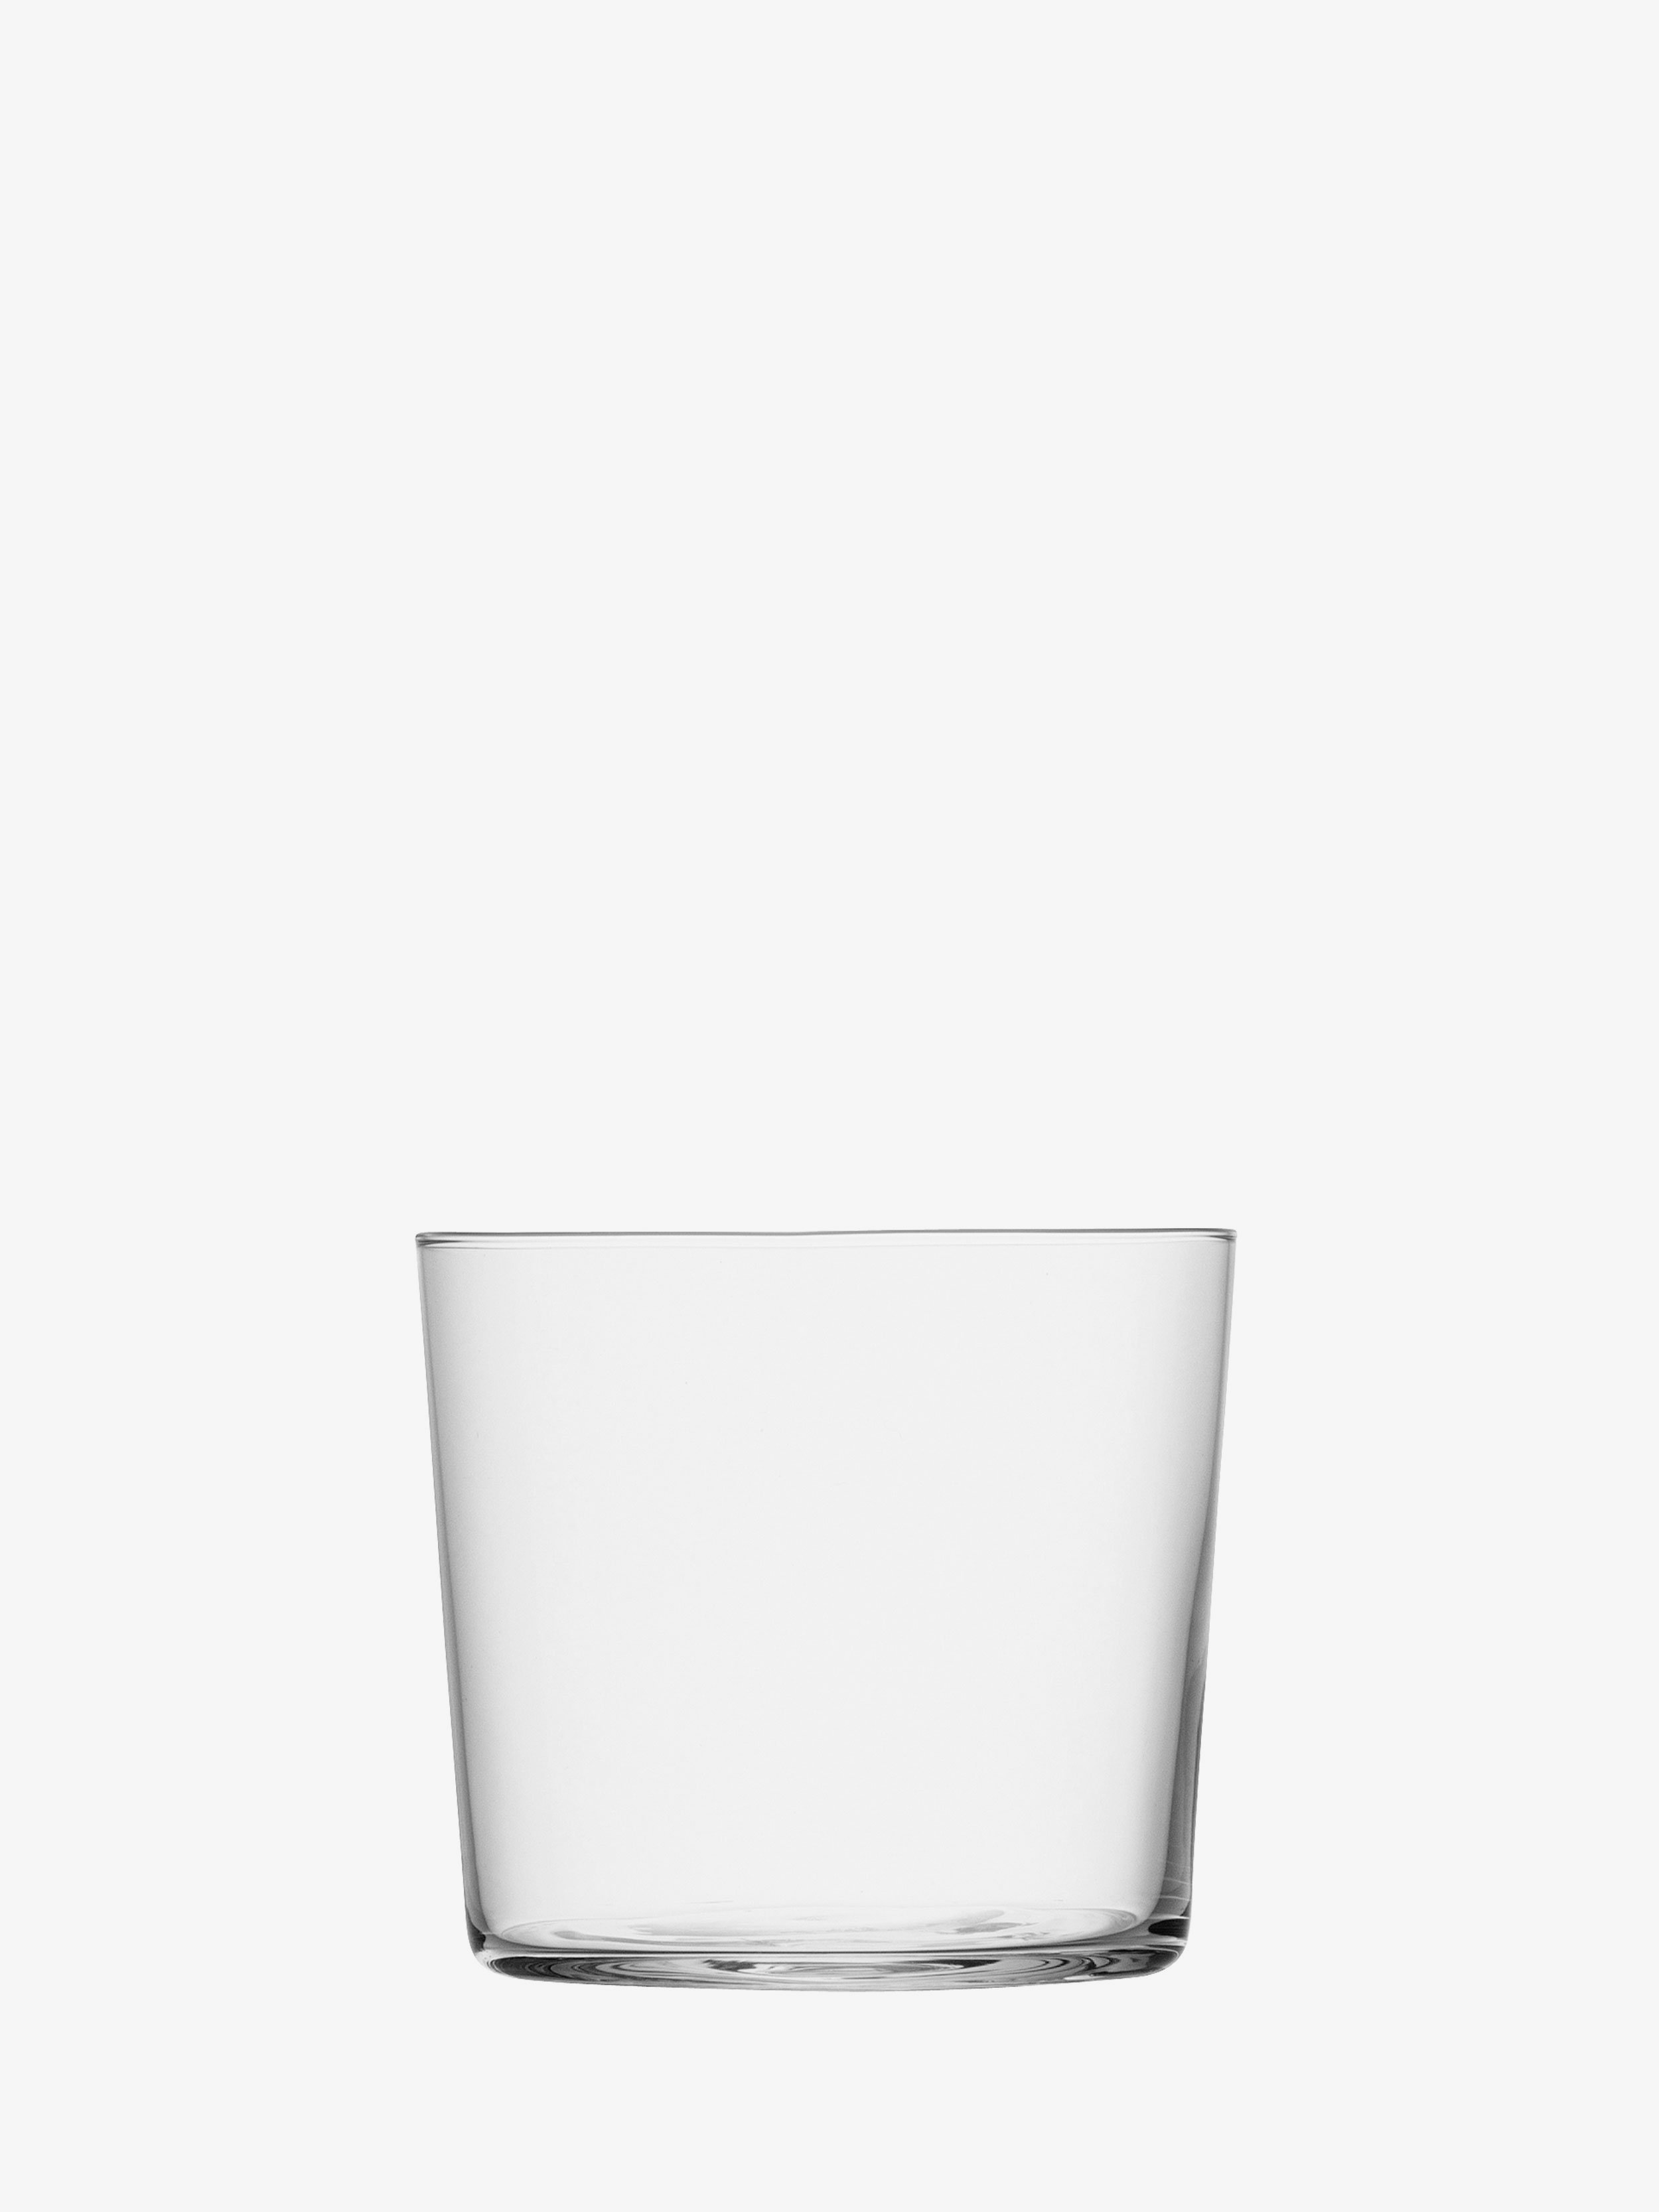 Tumbler (Low) x 4 310ml, Clear, Gio Collection